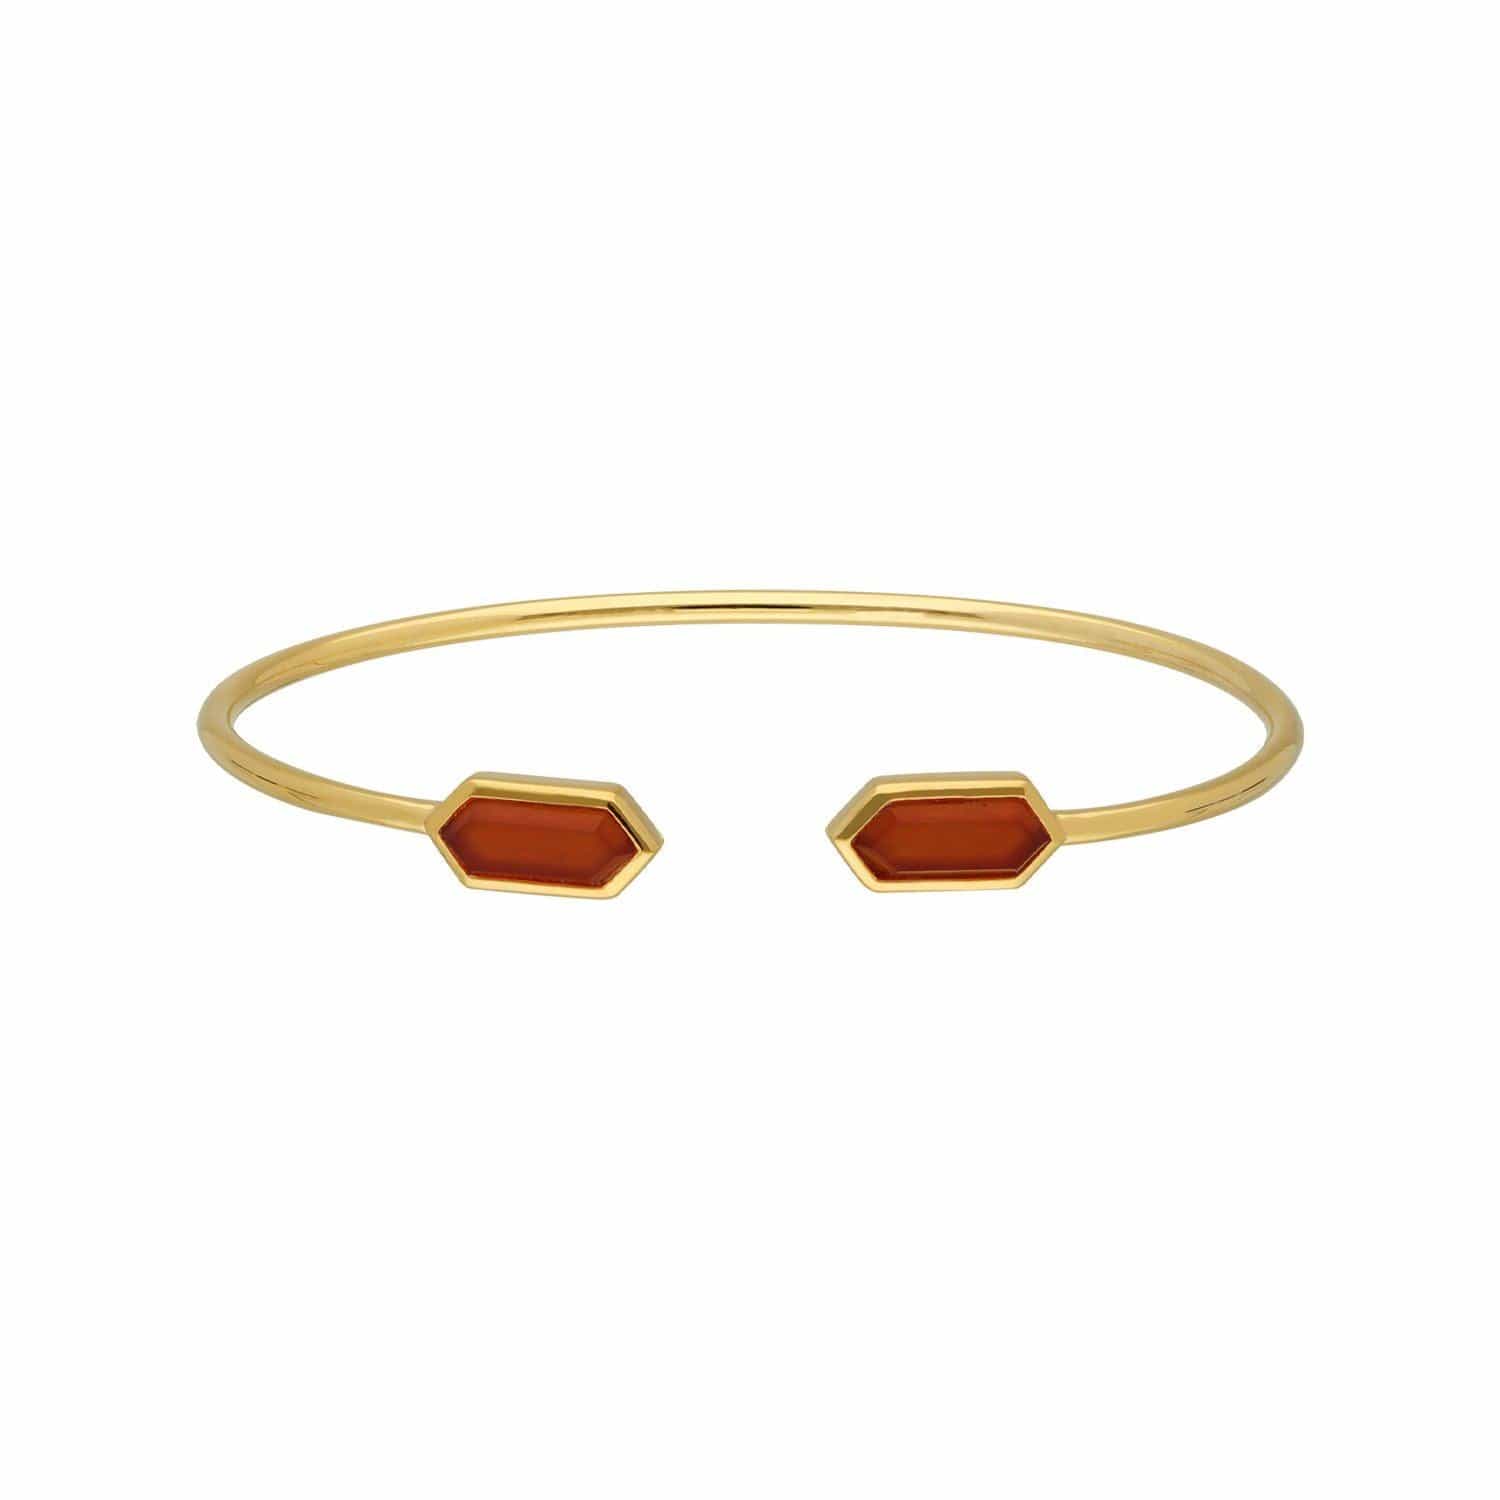 Geometric Dyed Red Carnelian Open Bangle in Gold Plated Sterling Silver